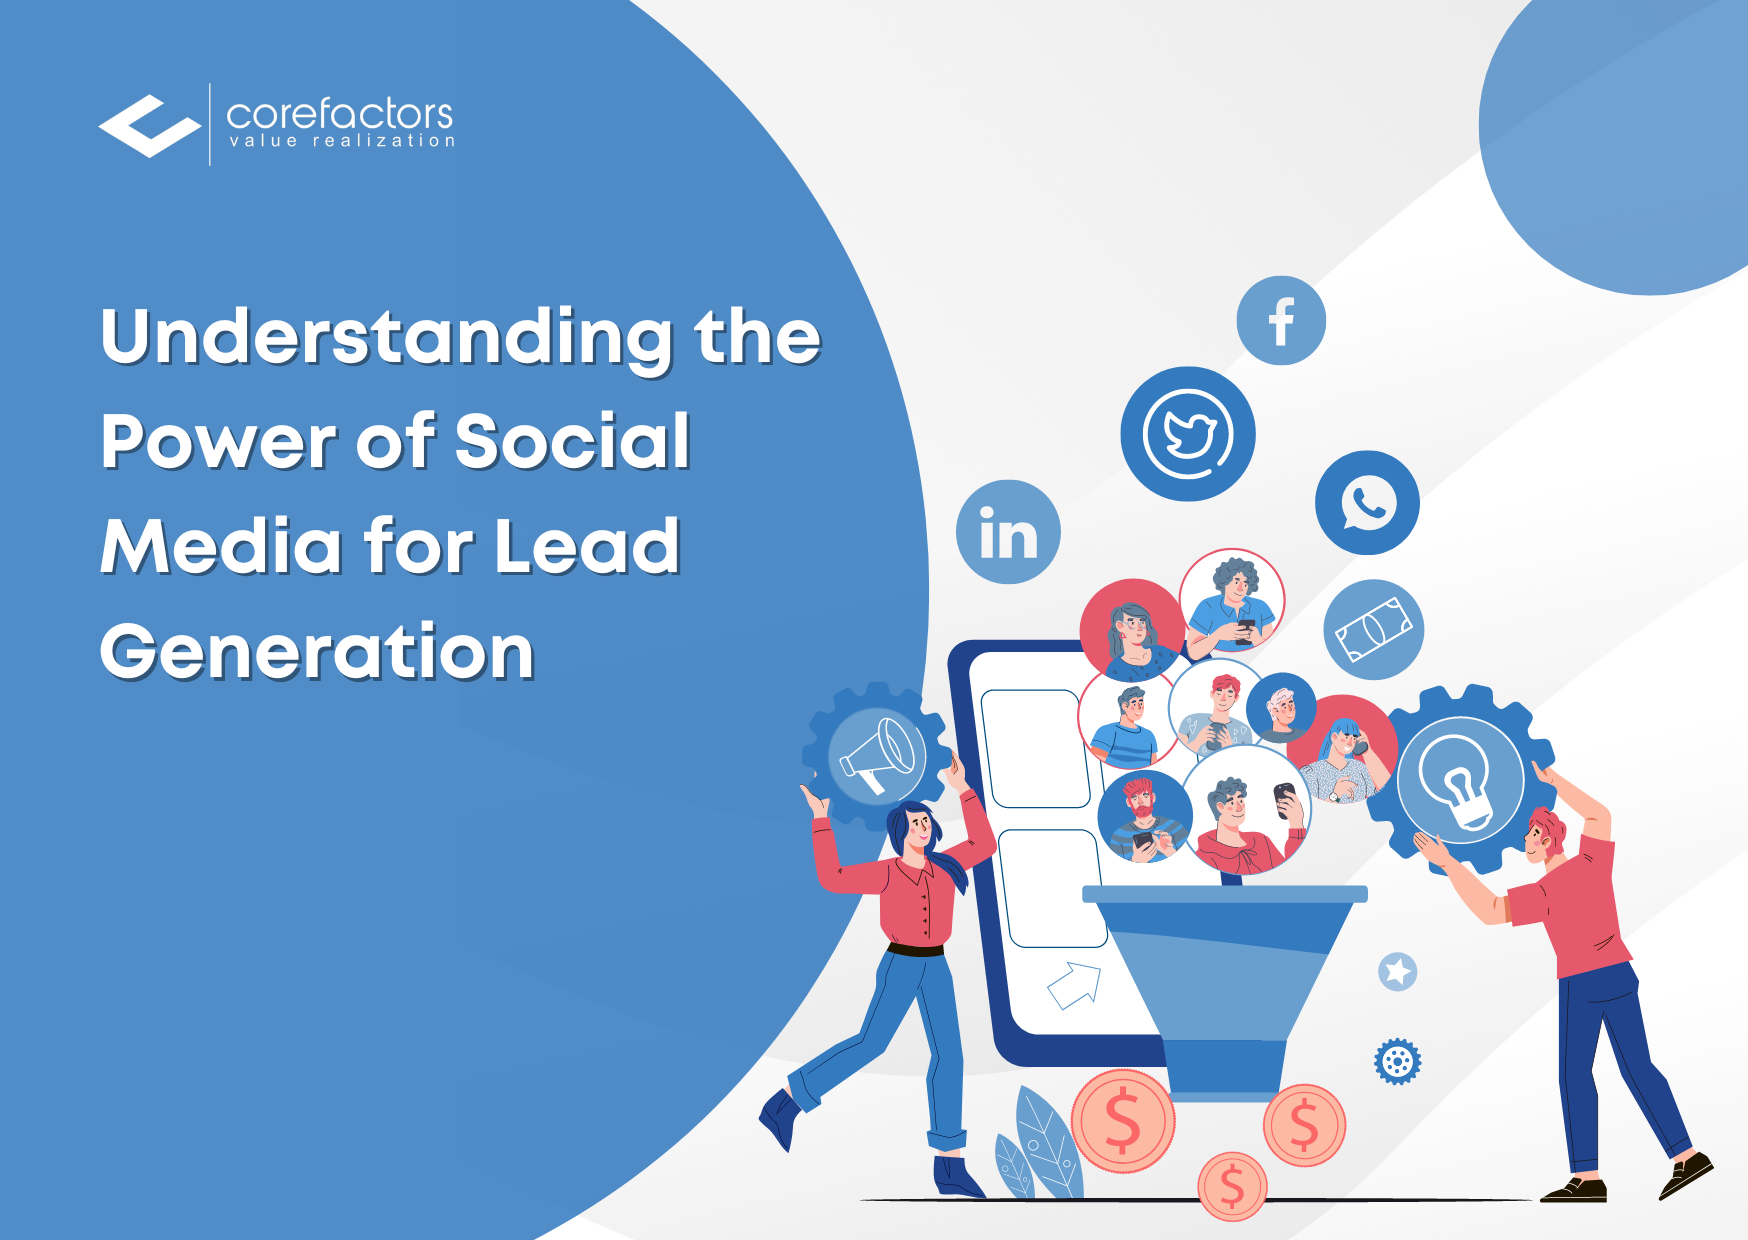 The Power of Social Media for Lead Generation